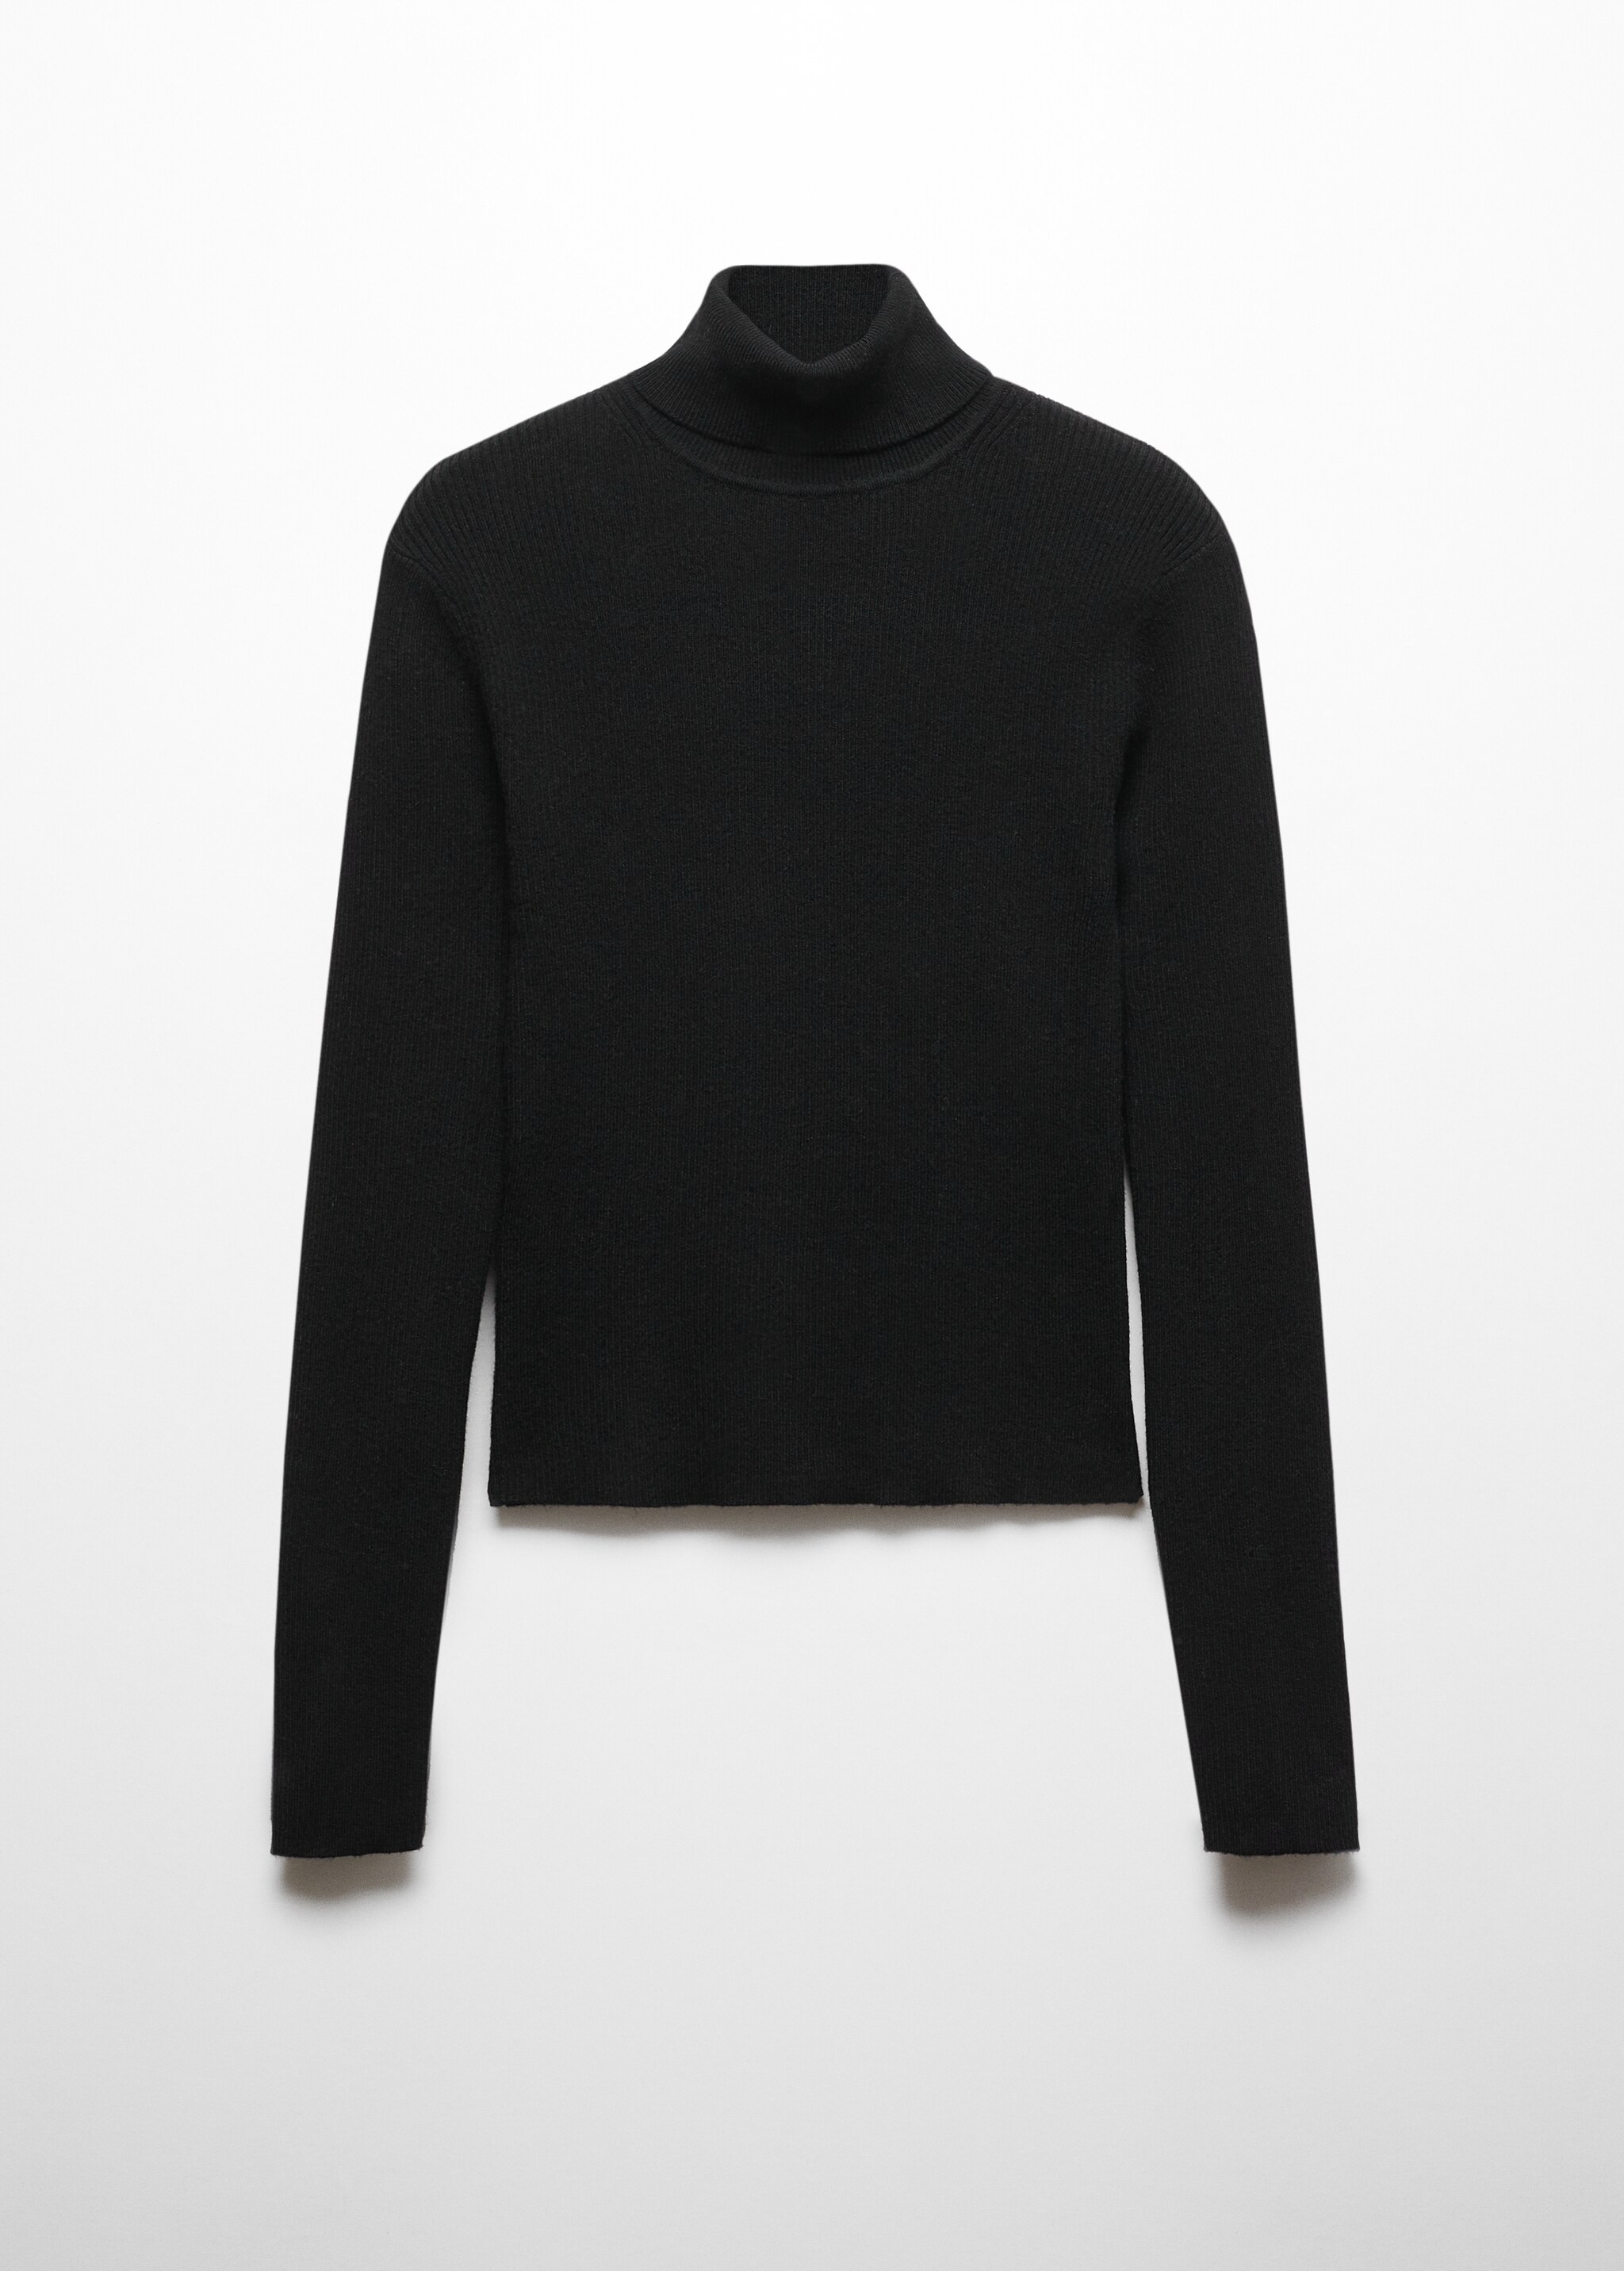 Turtleneck sweater - Article without model